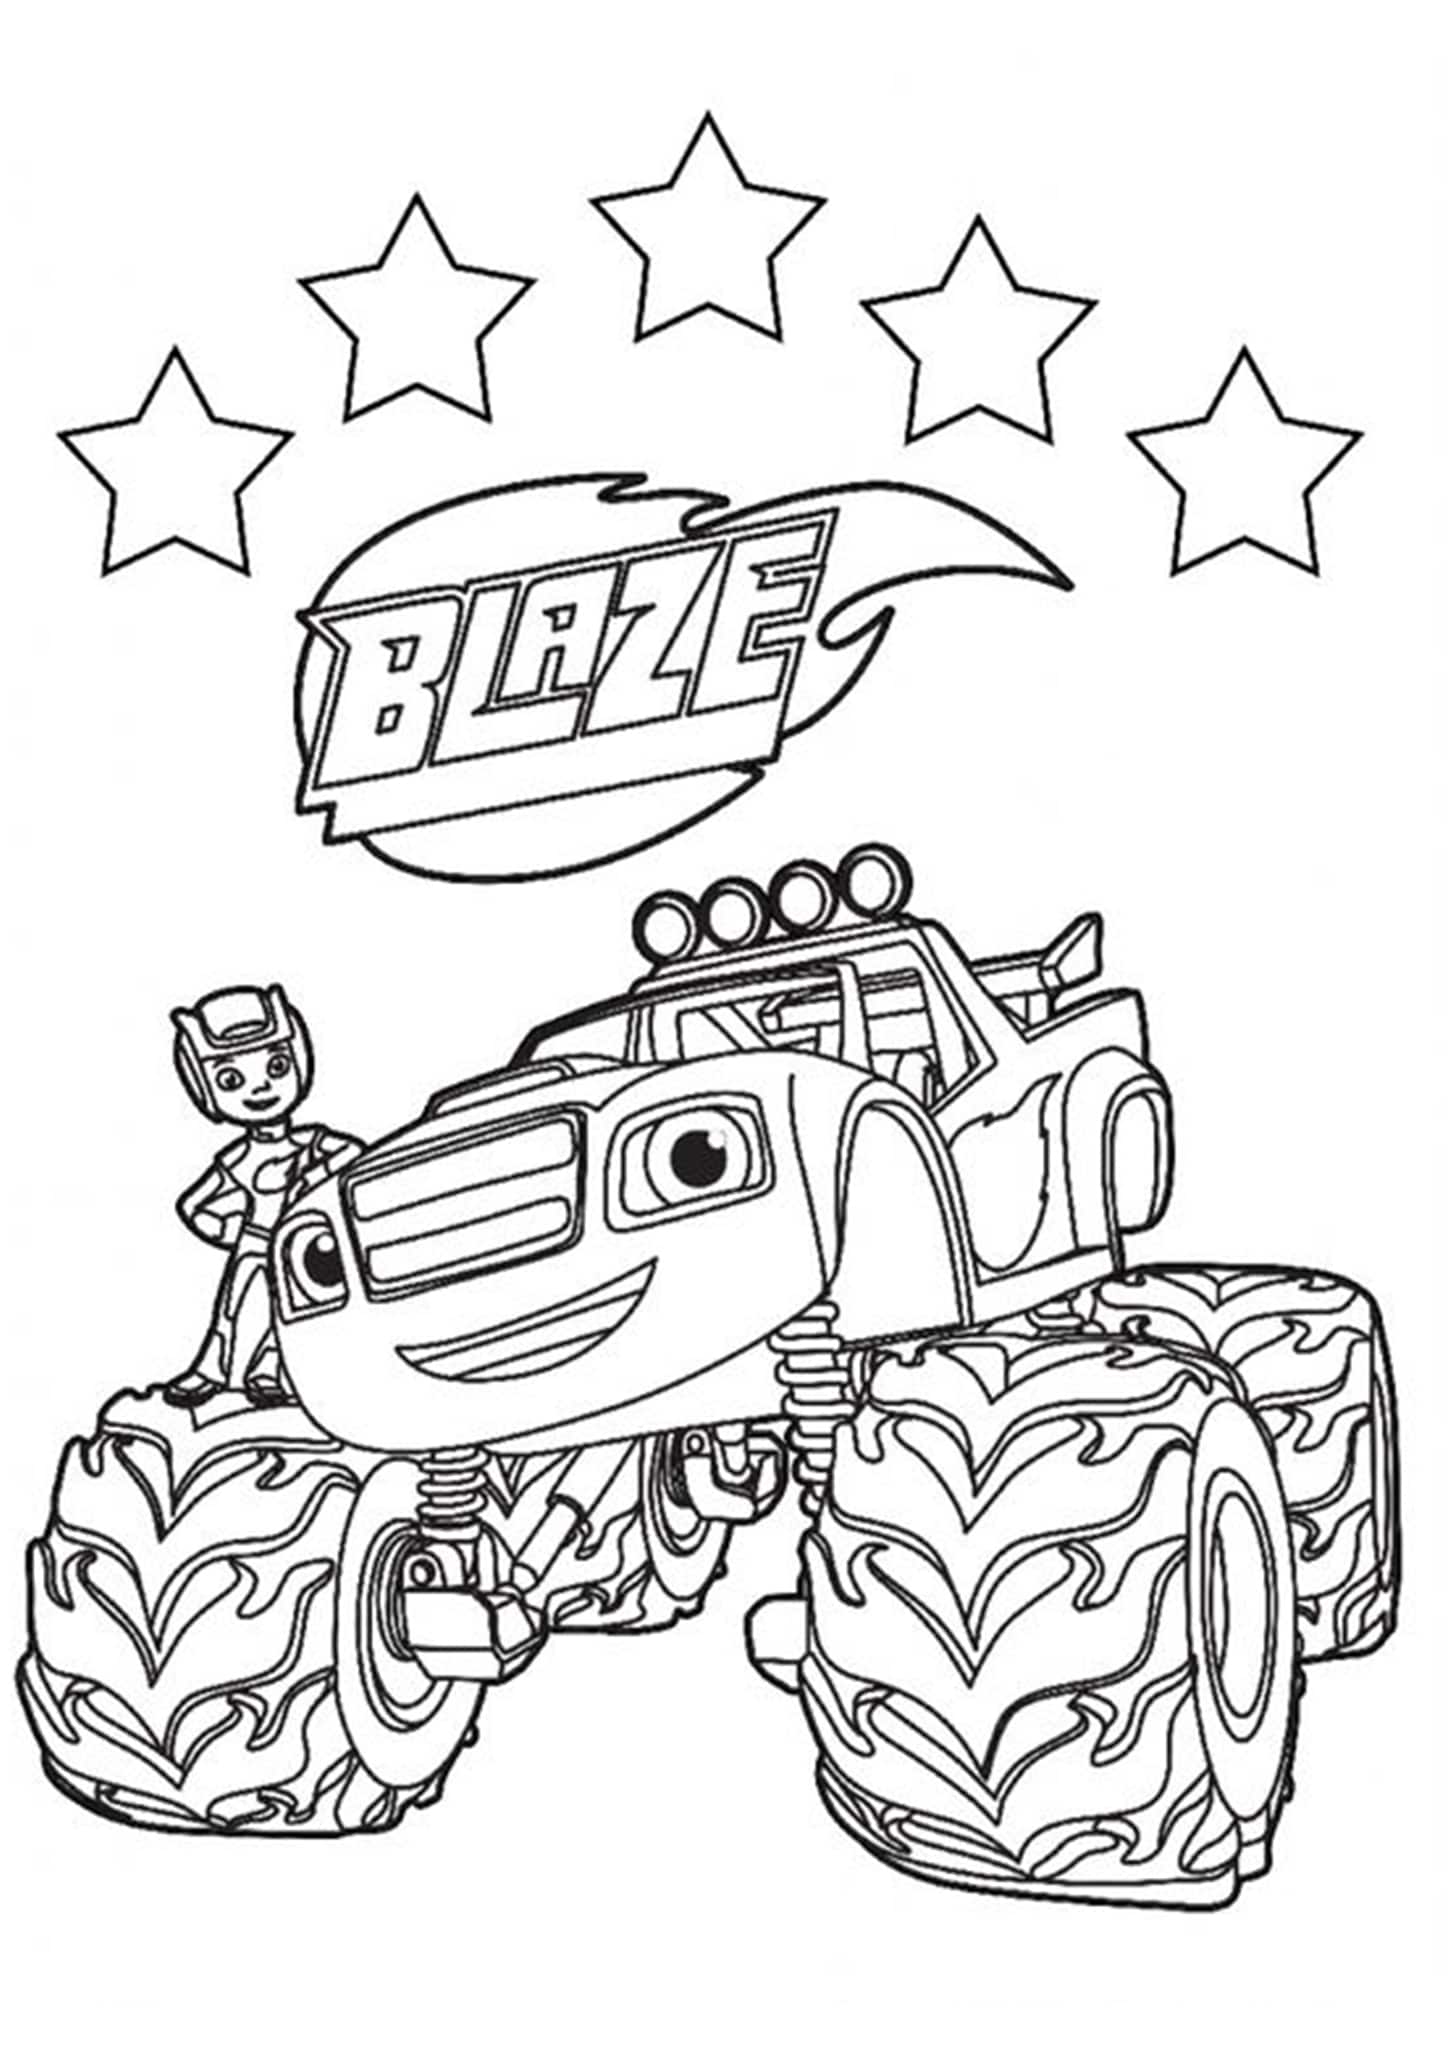 monster-truck-blaze-coloring-page-download-print-or-color-online-for-free